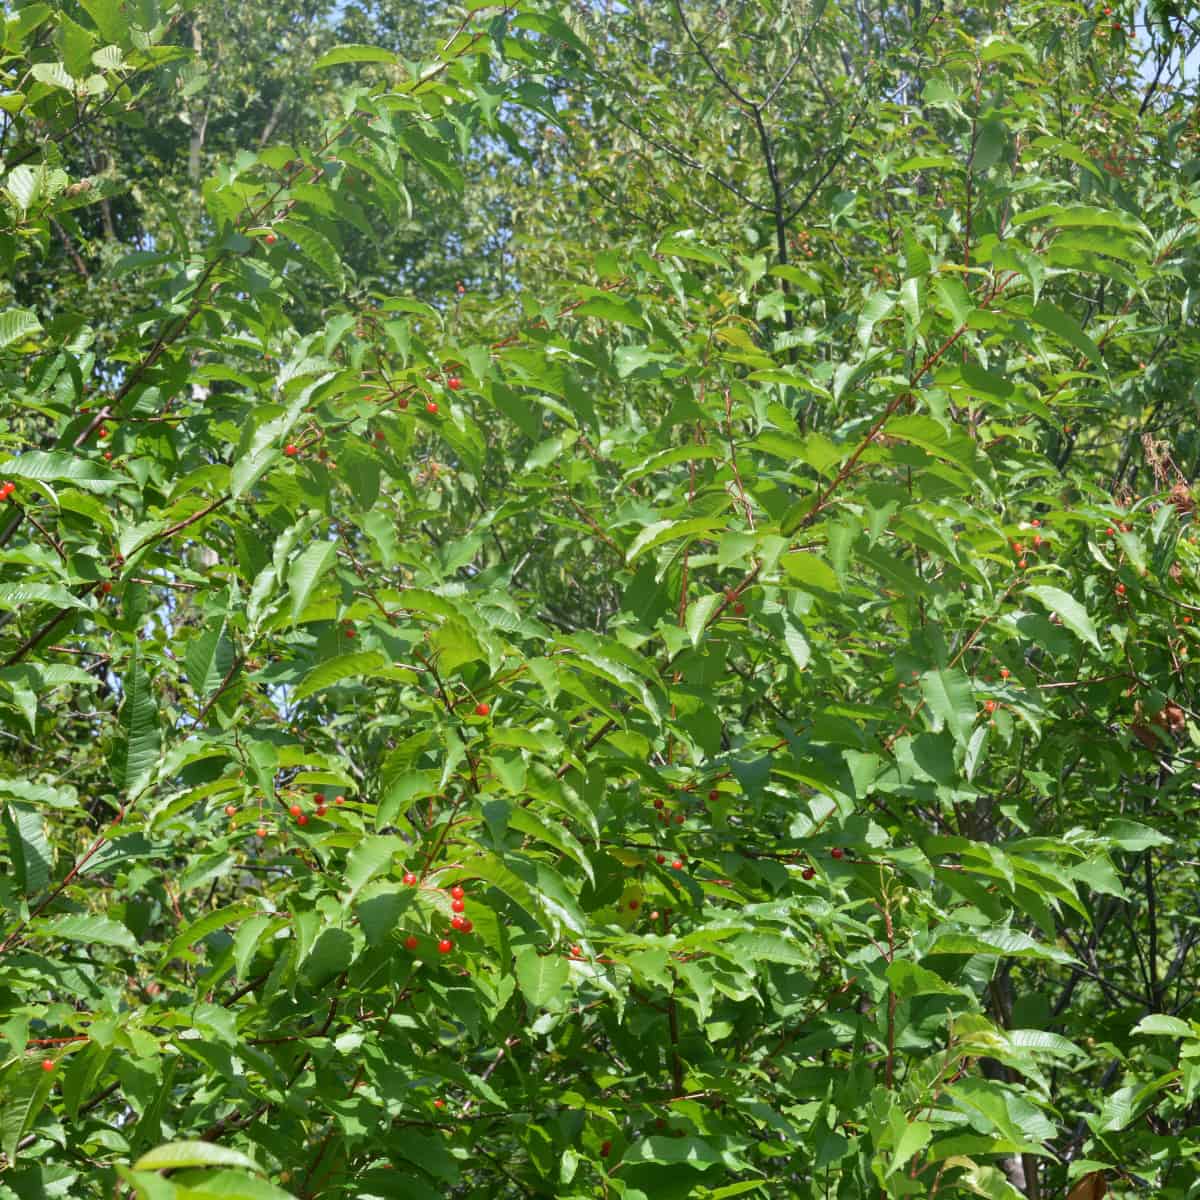 A cherry tree, showing leaves and fruit